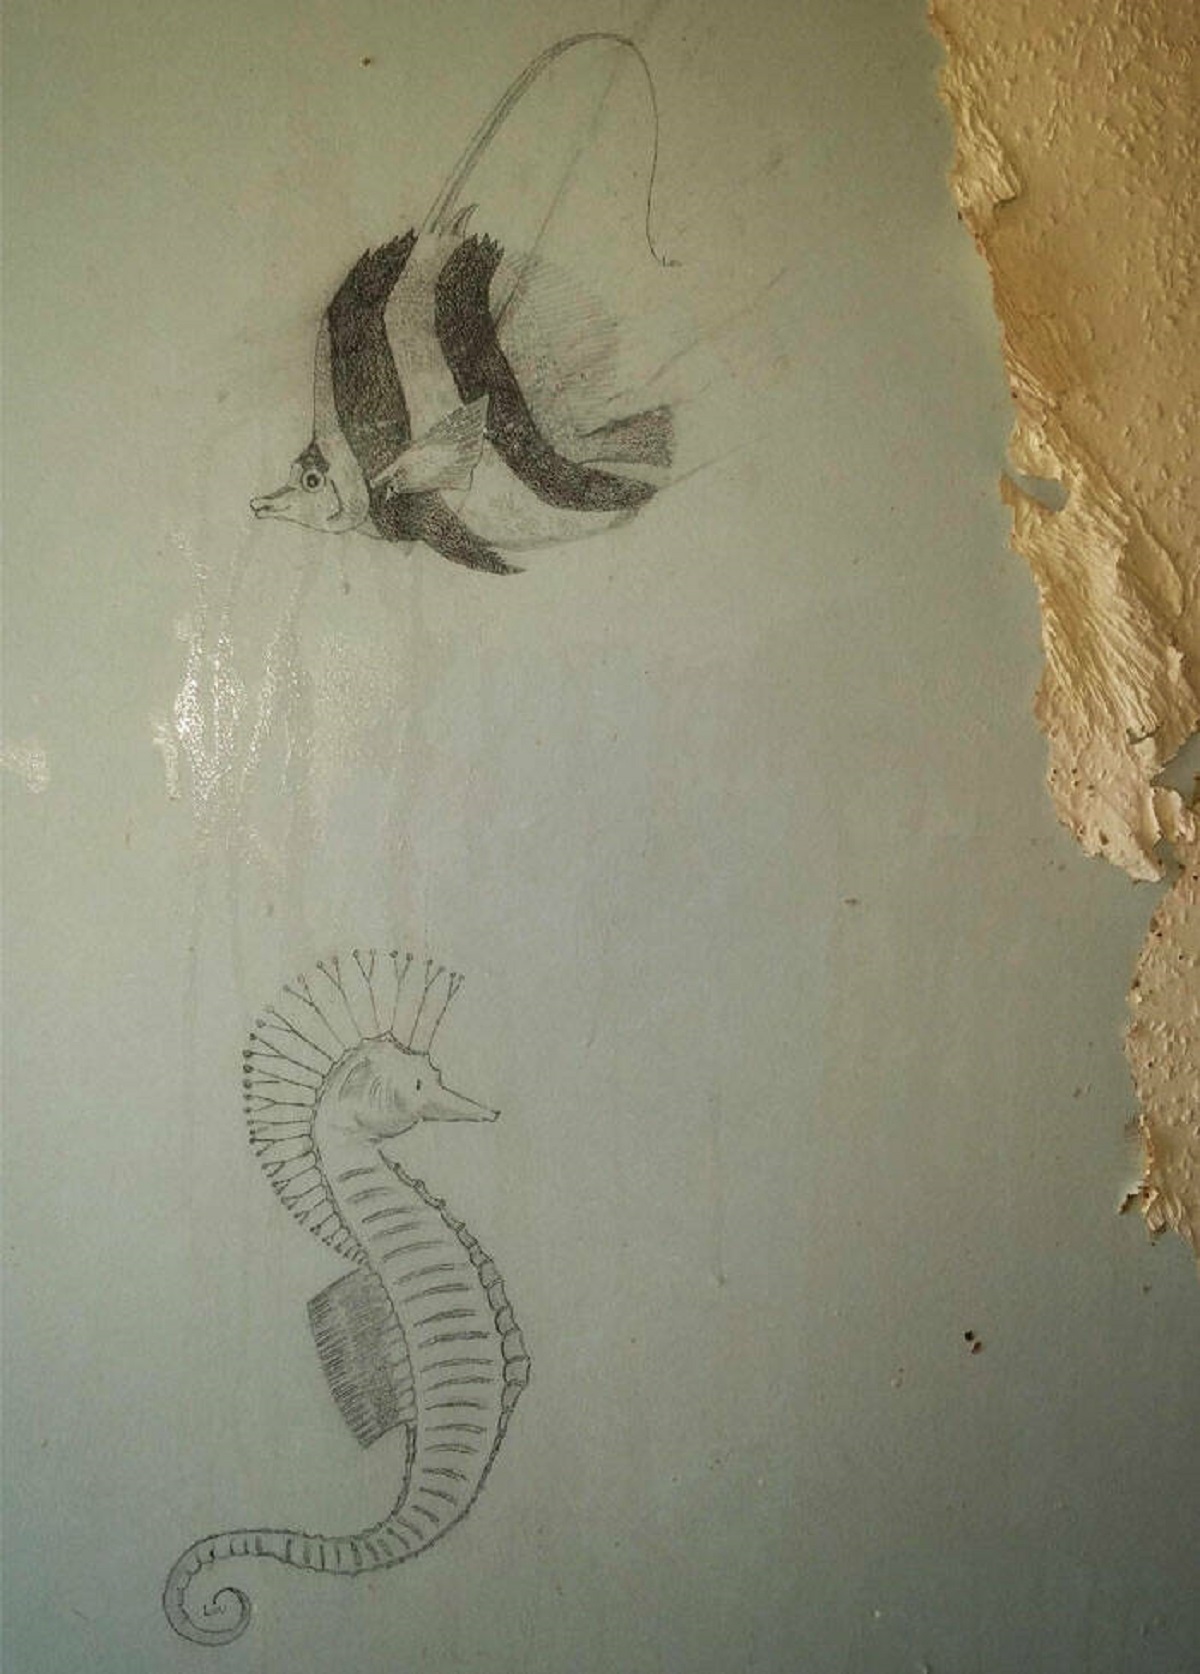 "Found Some Nice Drawings Under The Wallpaper I'm Removing"